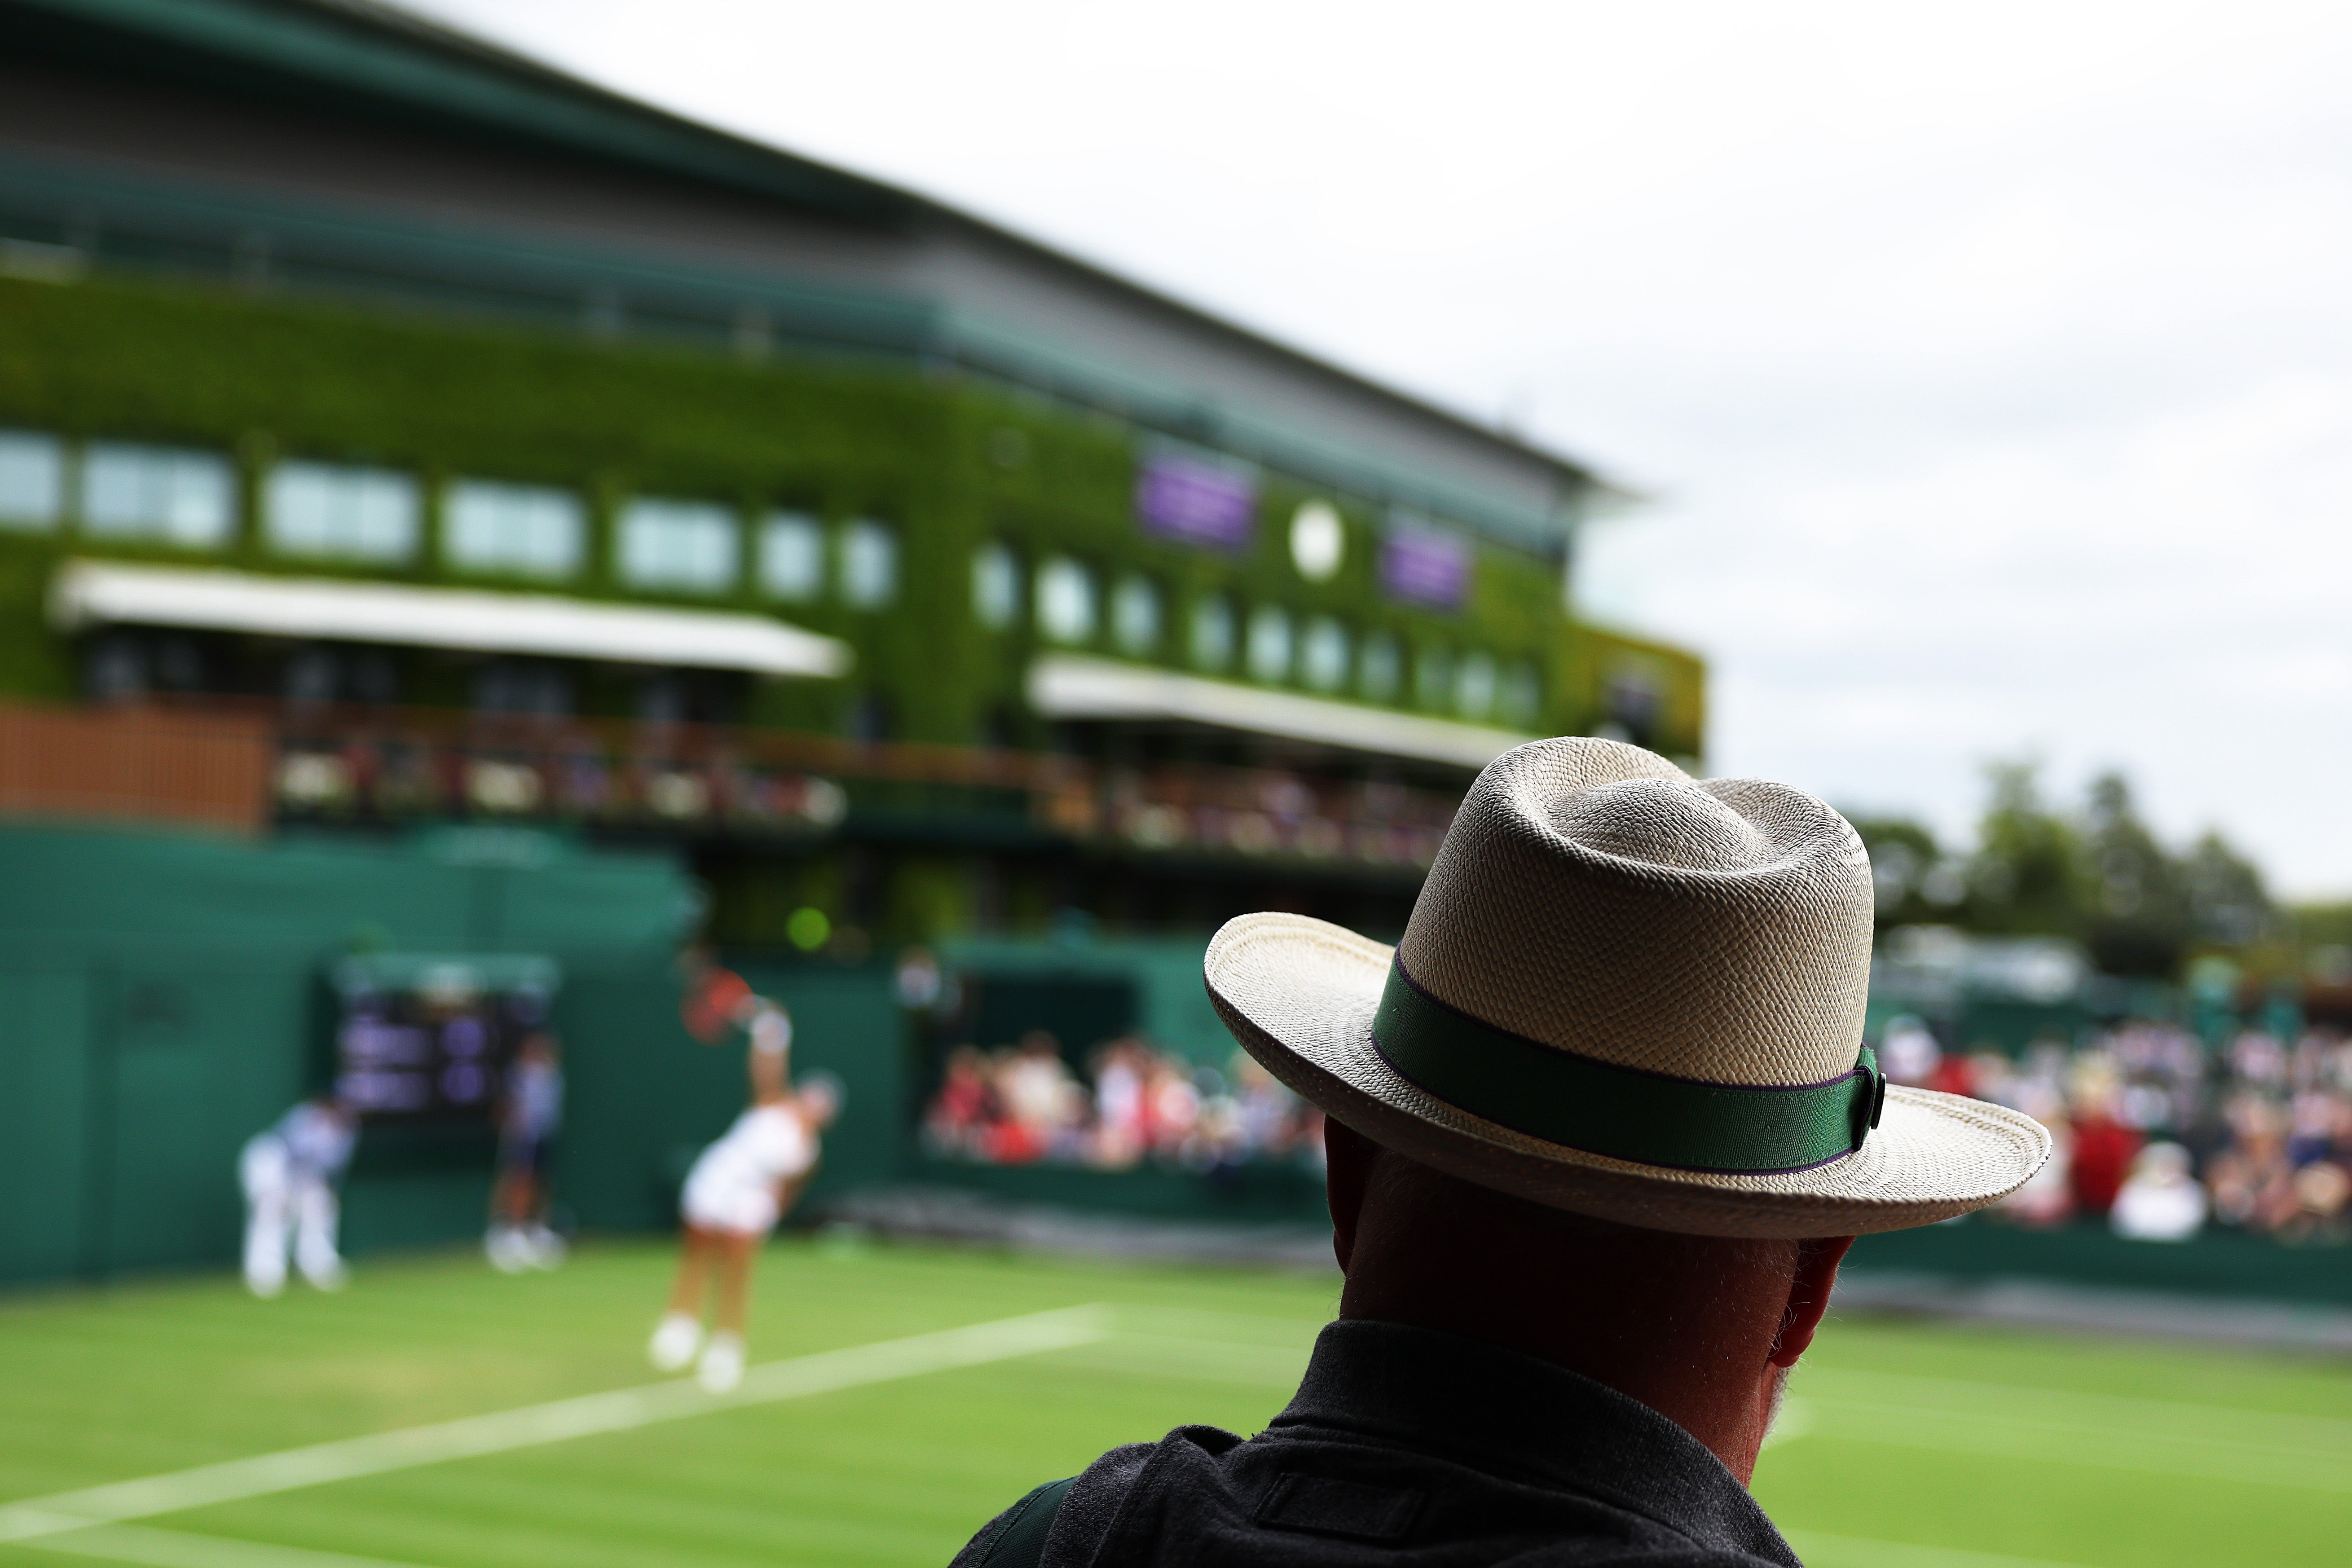 Panama hats are available for a hair-raising £120 in the Wimbledon shop